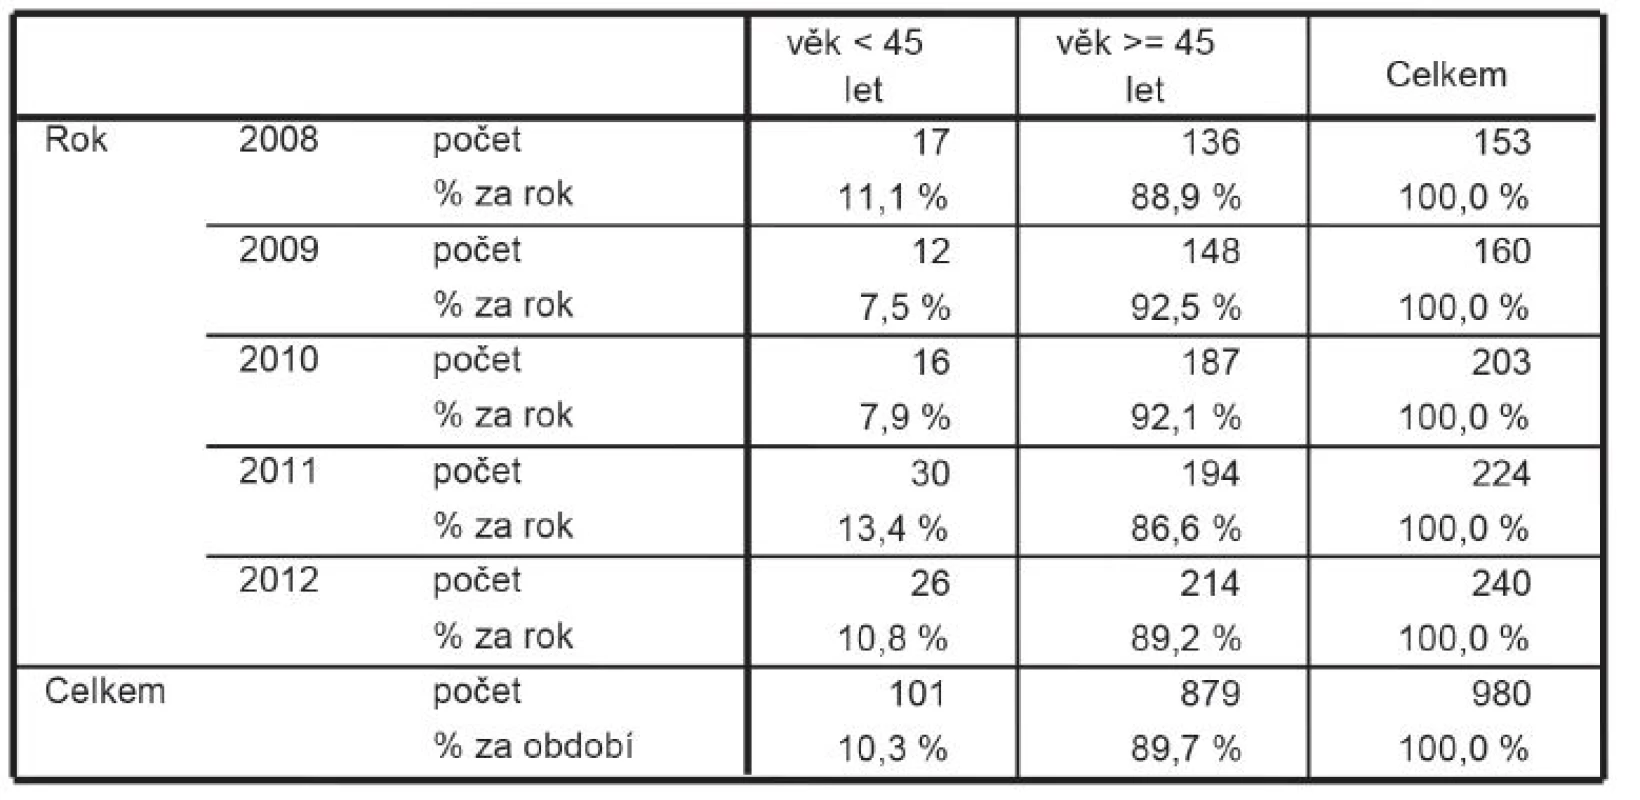 Počty pacientek s ca prsu operovaných na I. chirurgické klinice FN Olomouc v letech 2008–2012
Tab. 1: Numbers of patients with breast carcinoma who underwent surgery at our clinic during 2008–2012